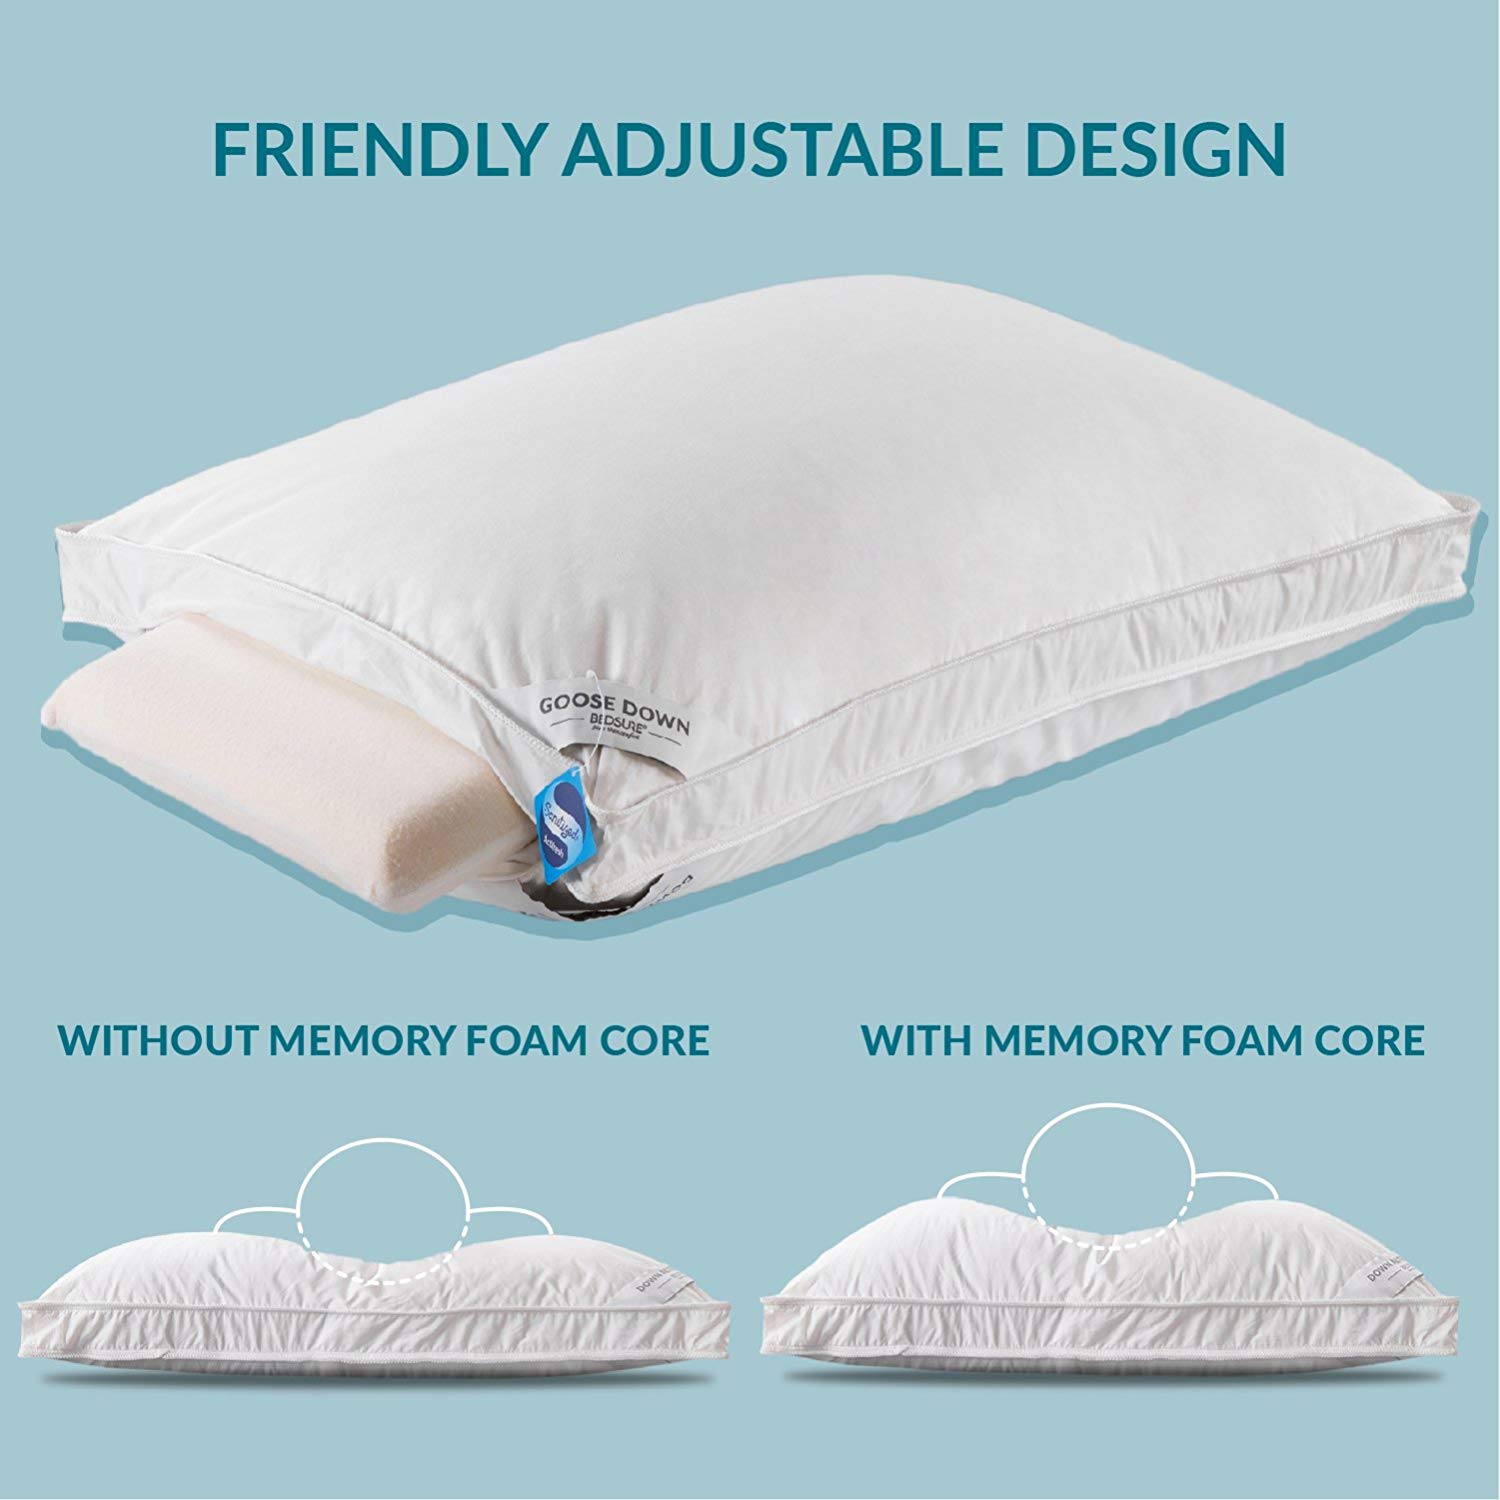 Adjustable pillow with removable memory foam core piece